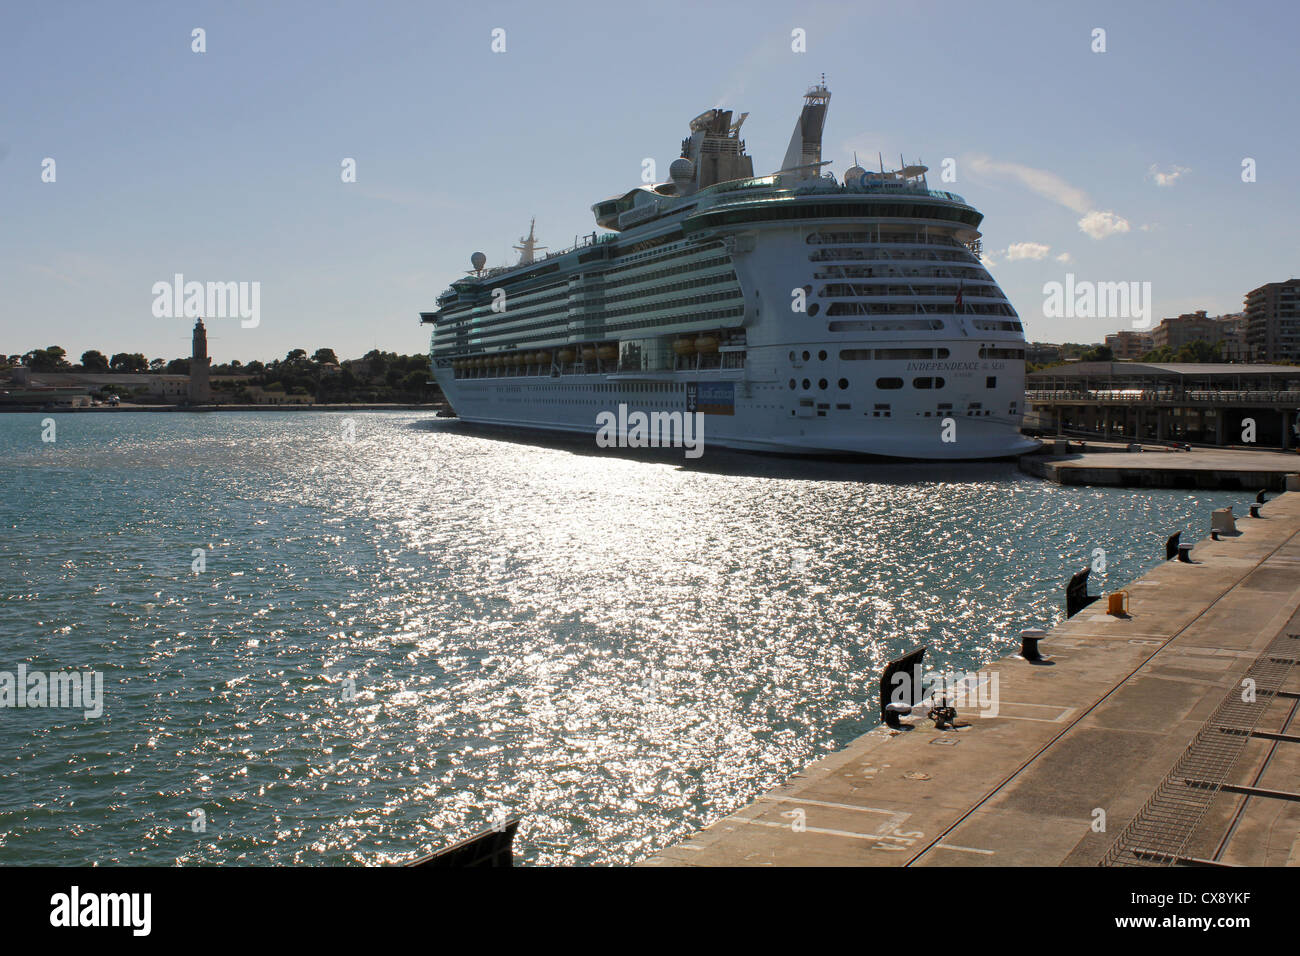 Royal Caribbean International Cruise Line 'Independence of the Seas' at late afternoon on berth in the Port of Palma de Mallorca Stock Photo